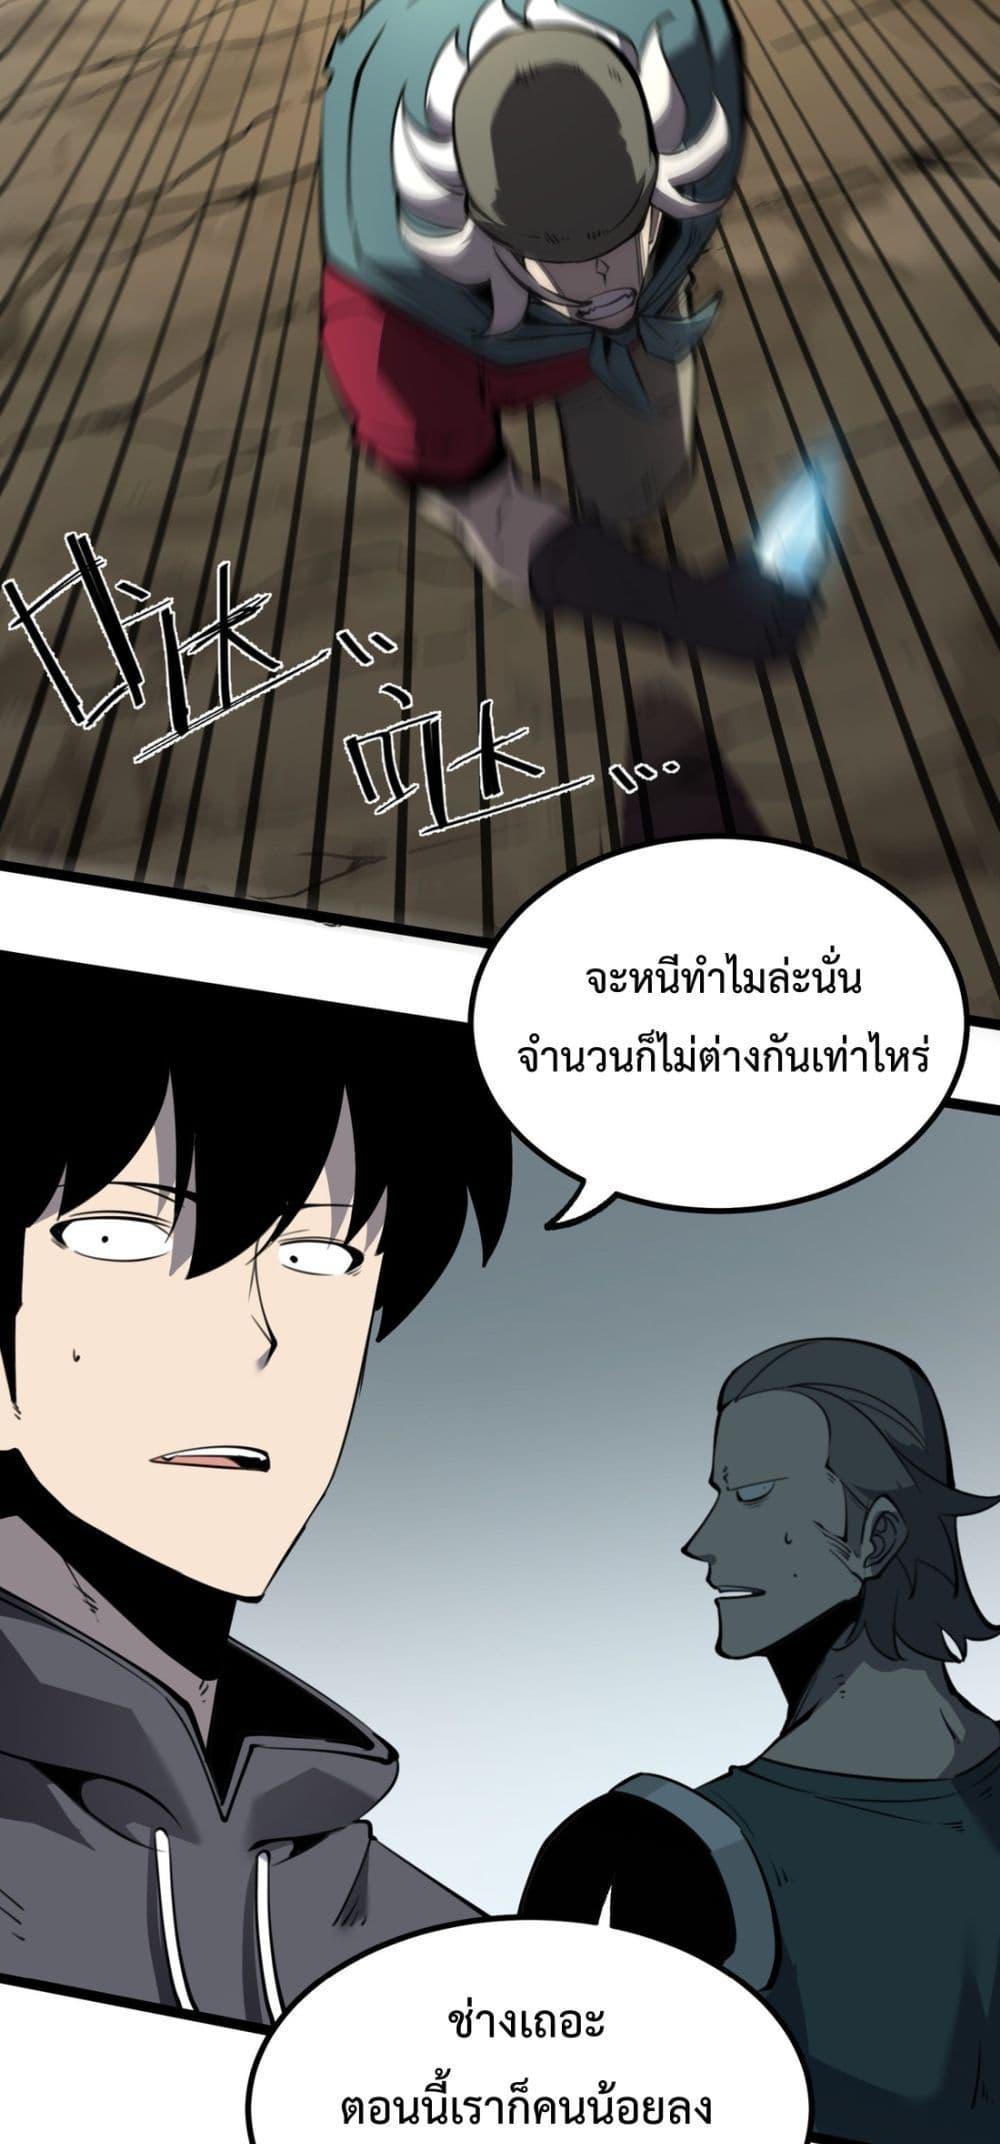 I Became The King by Scavenging โ€“ เนเธเนเธฅเน เน€เธฅเน€เธงเนเธฅเธฅเธฃเธดเนเธ เธ•เธญเธเธ—เธตเน 16 (5)